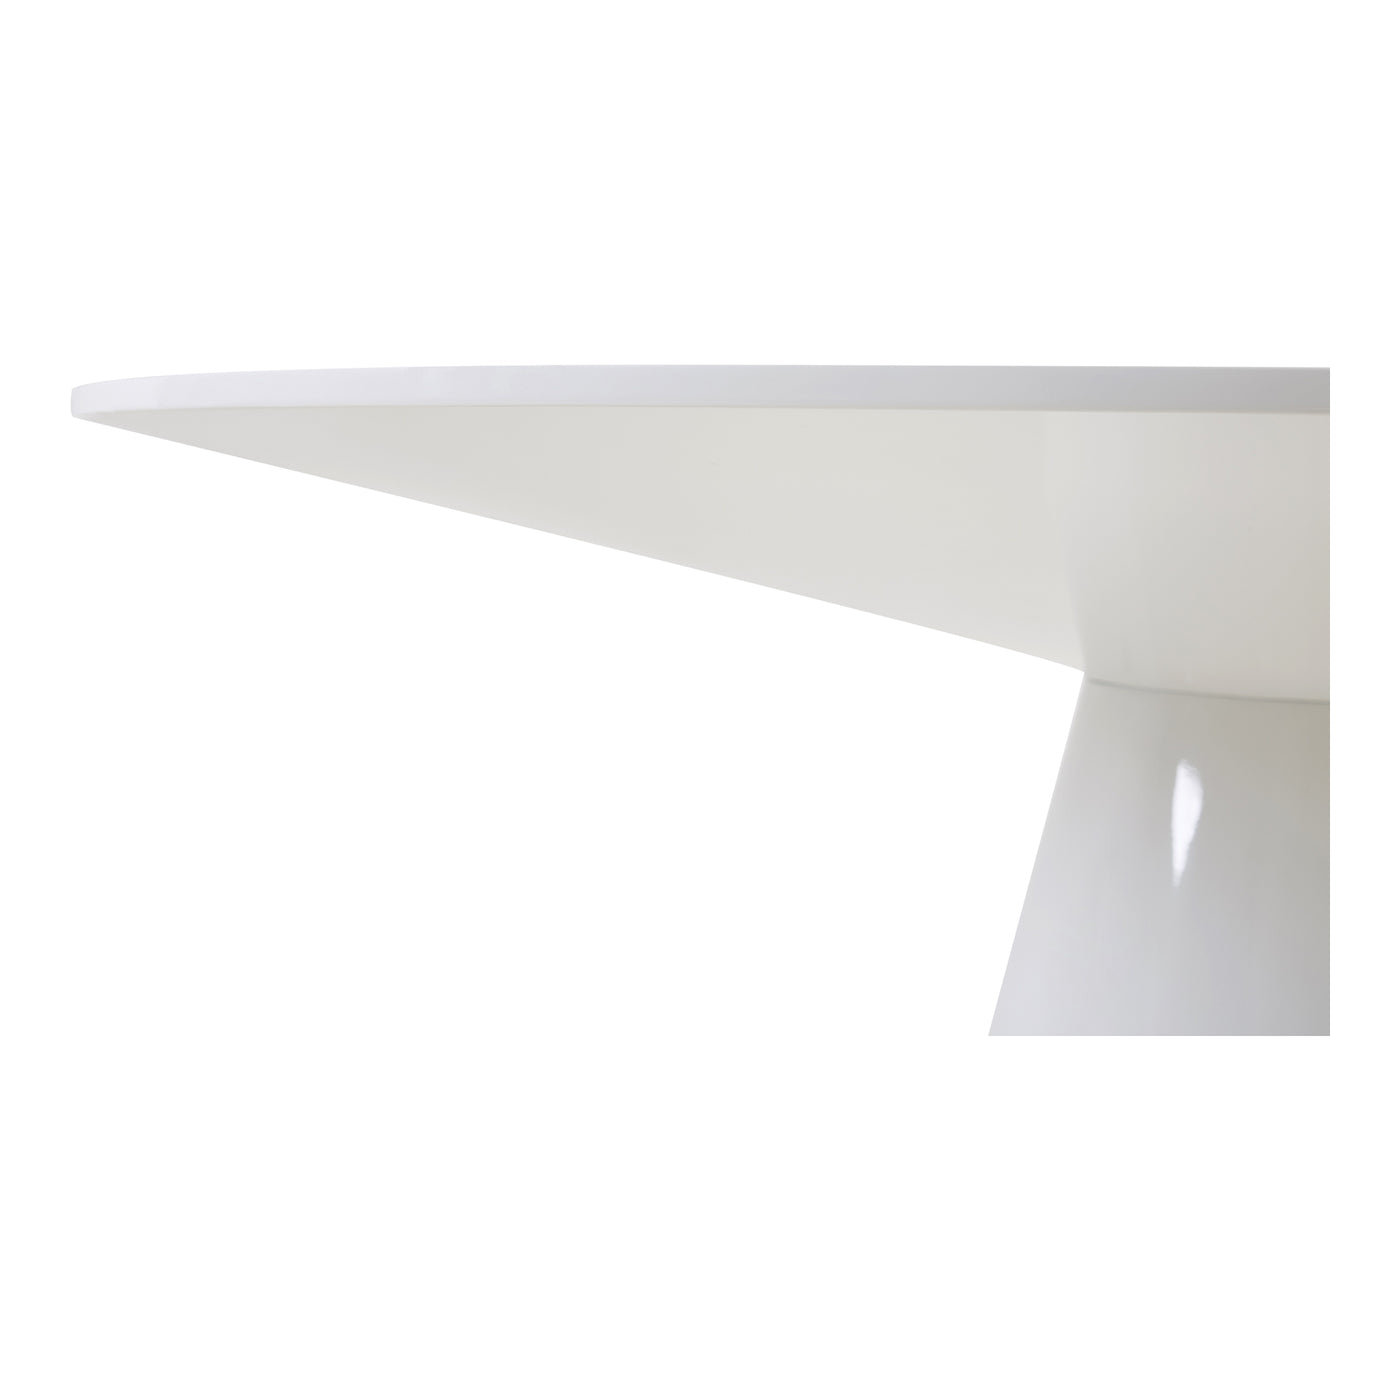 Spanning almost five feet, the circular Otago dining table can seat up to eight people in style. The all-white base and to...